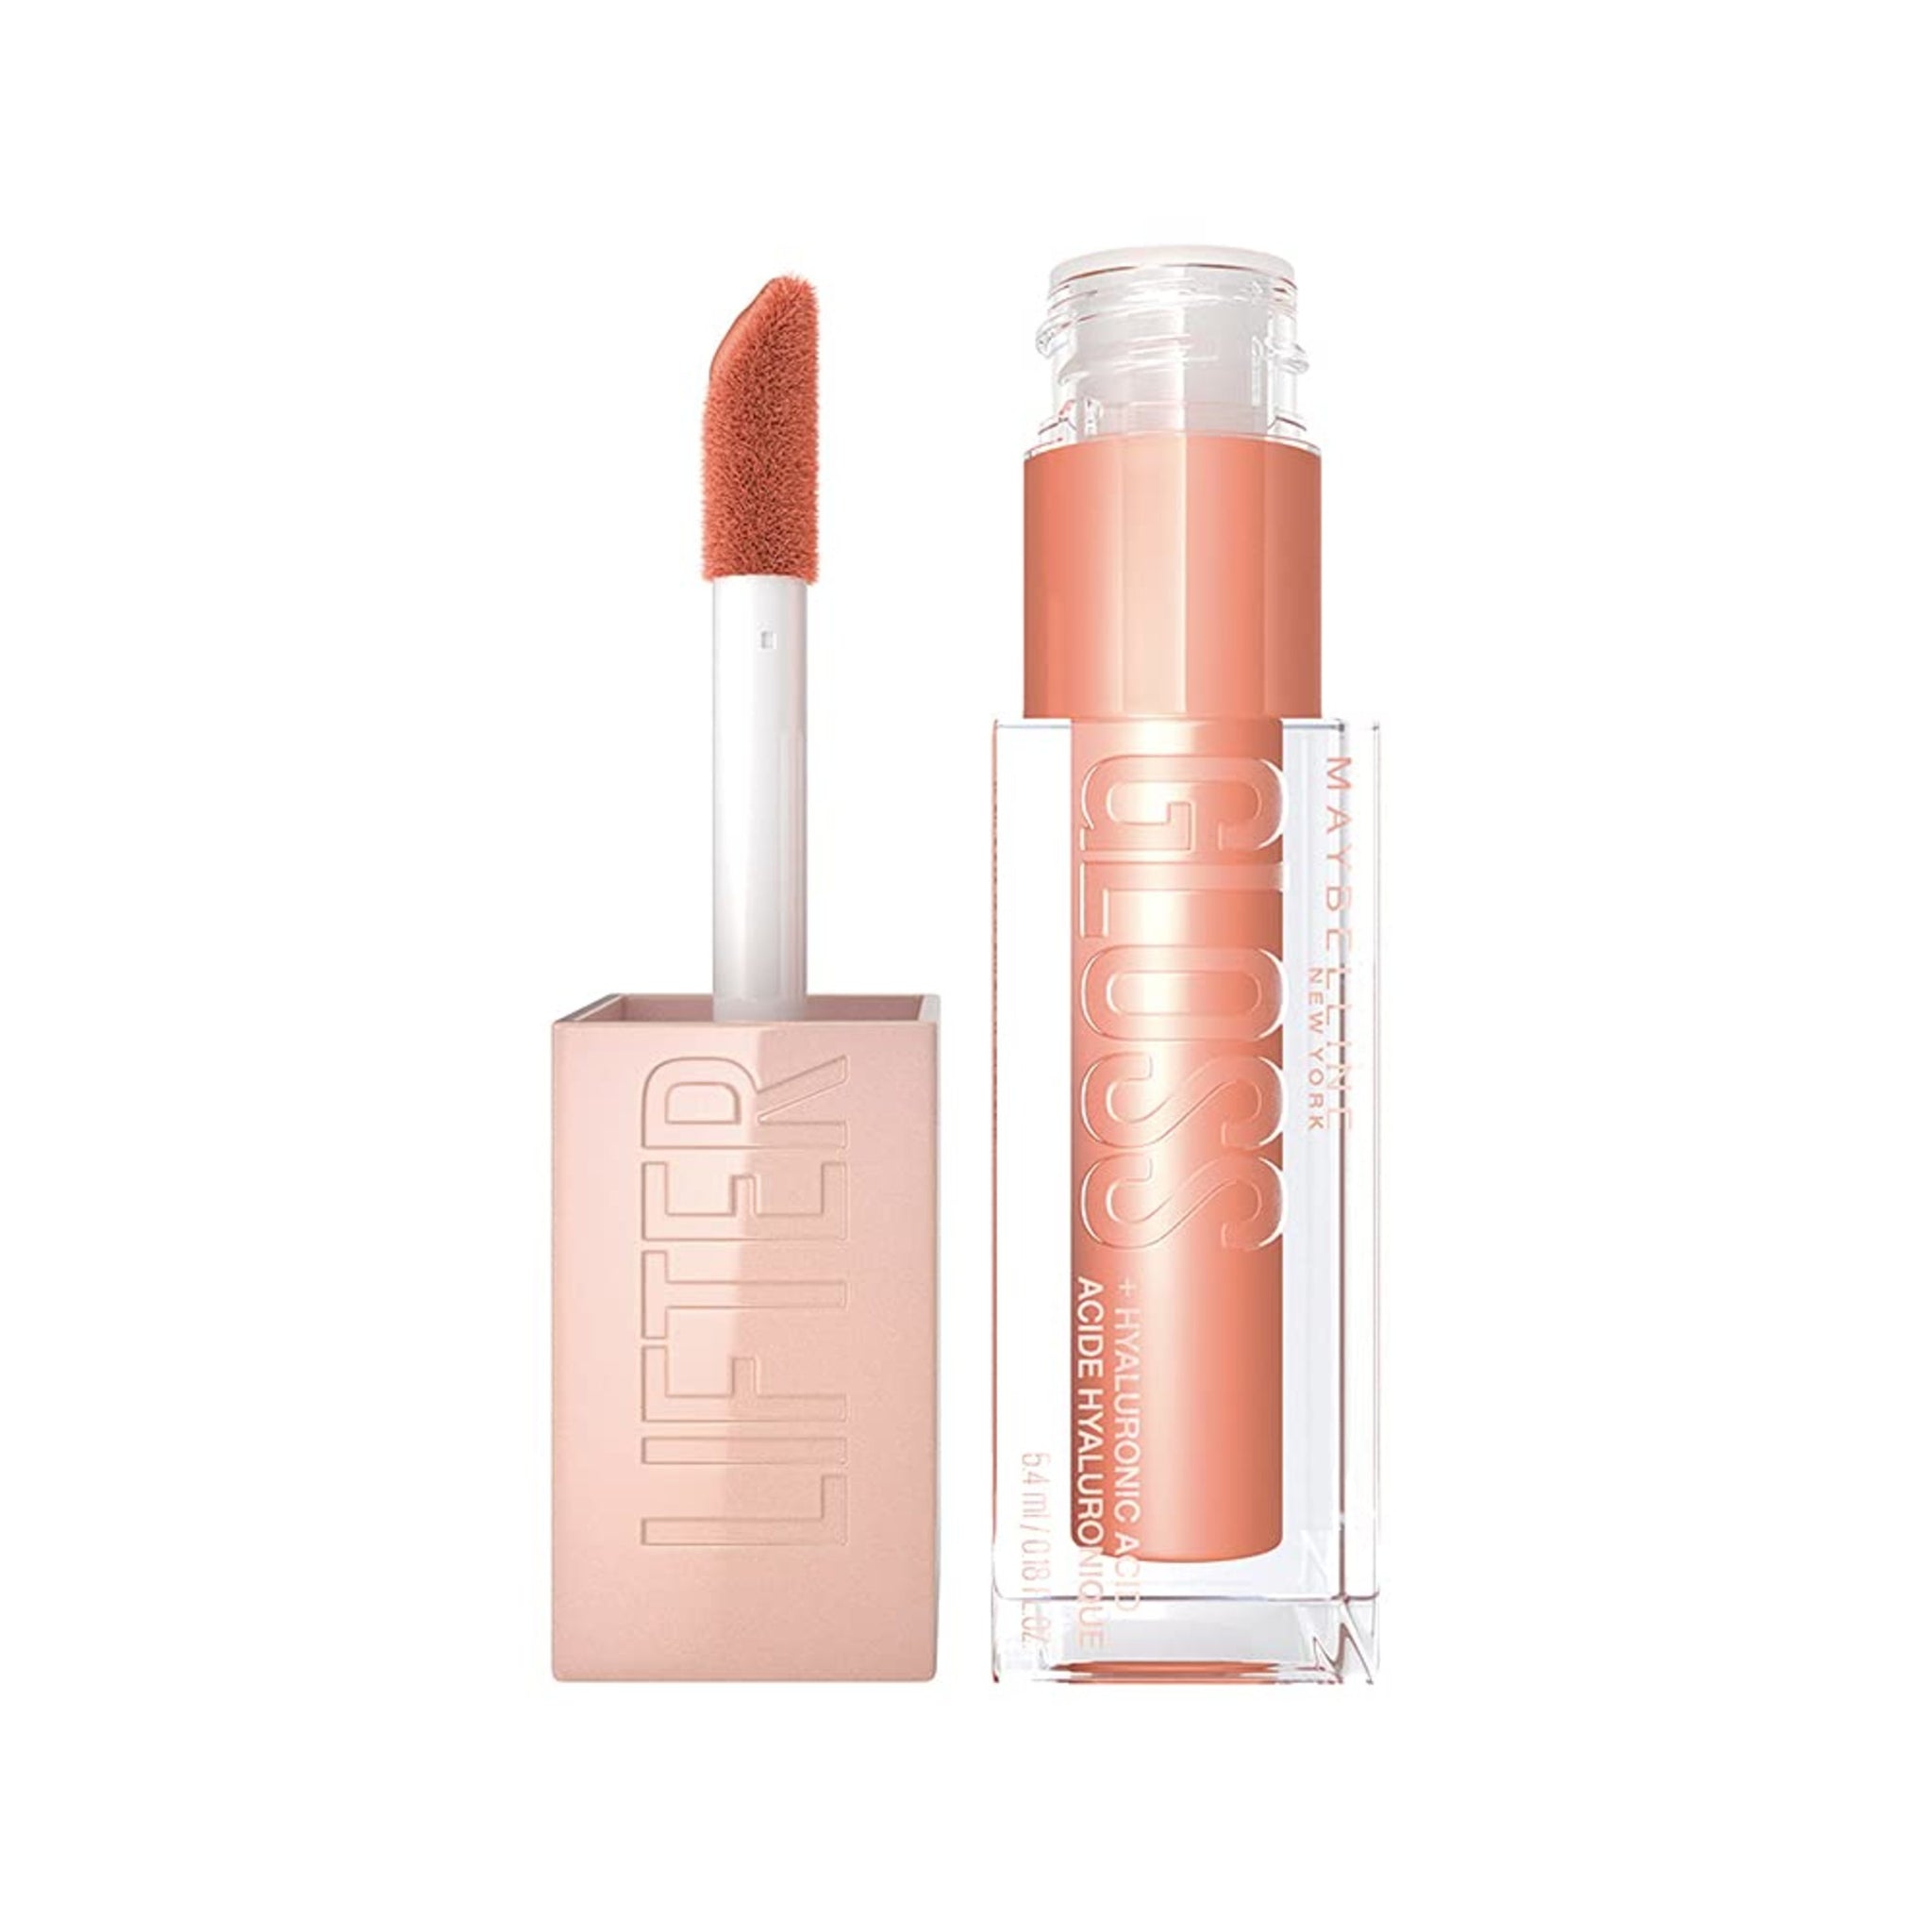 Lifter Gloss Lip Gloss Makeup With Hyaluronic Acid